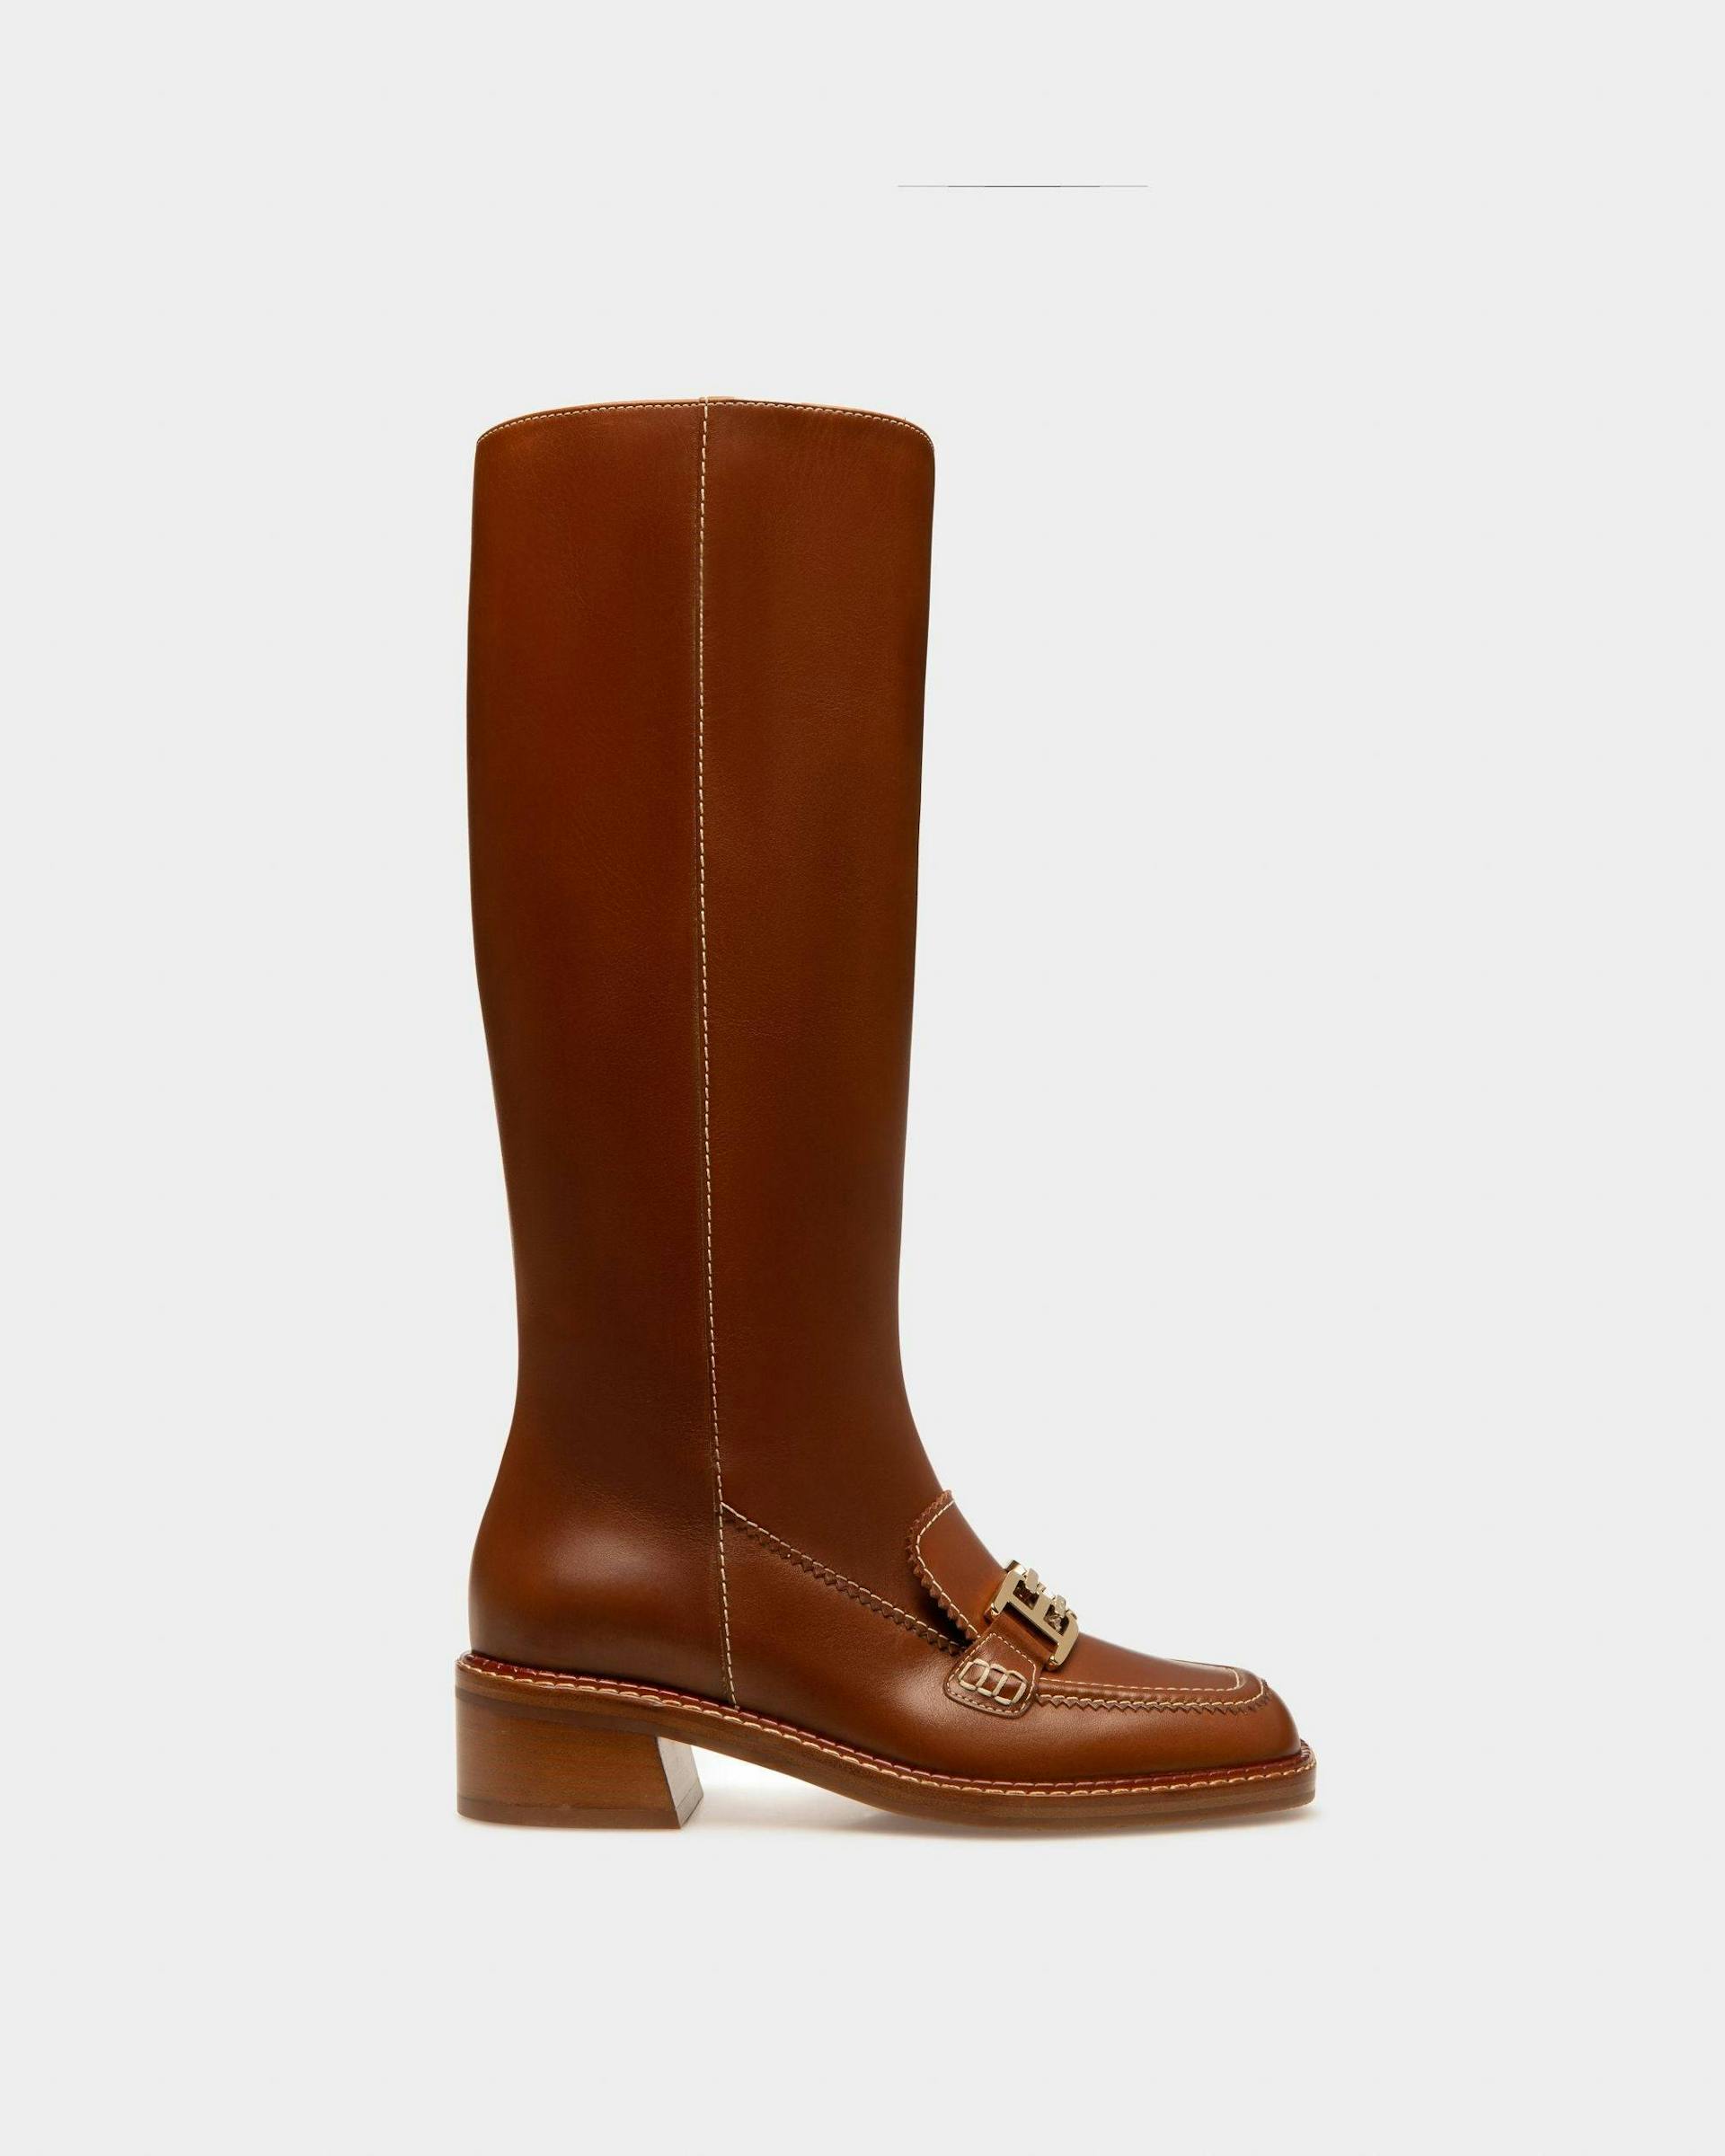 Ebele Leather Long Boots In Brown - Women's - Bally - 01